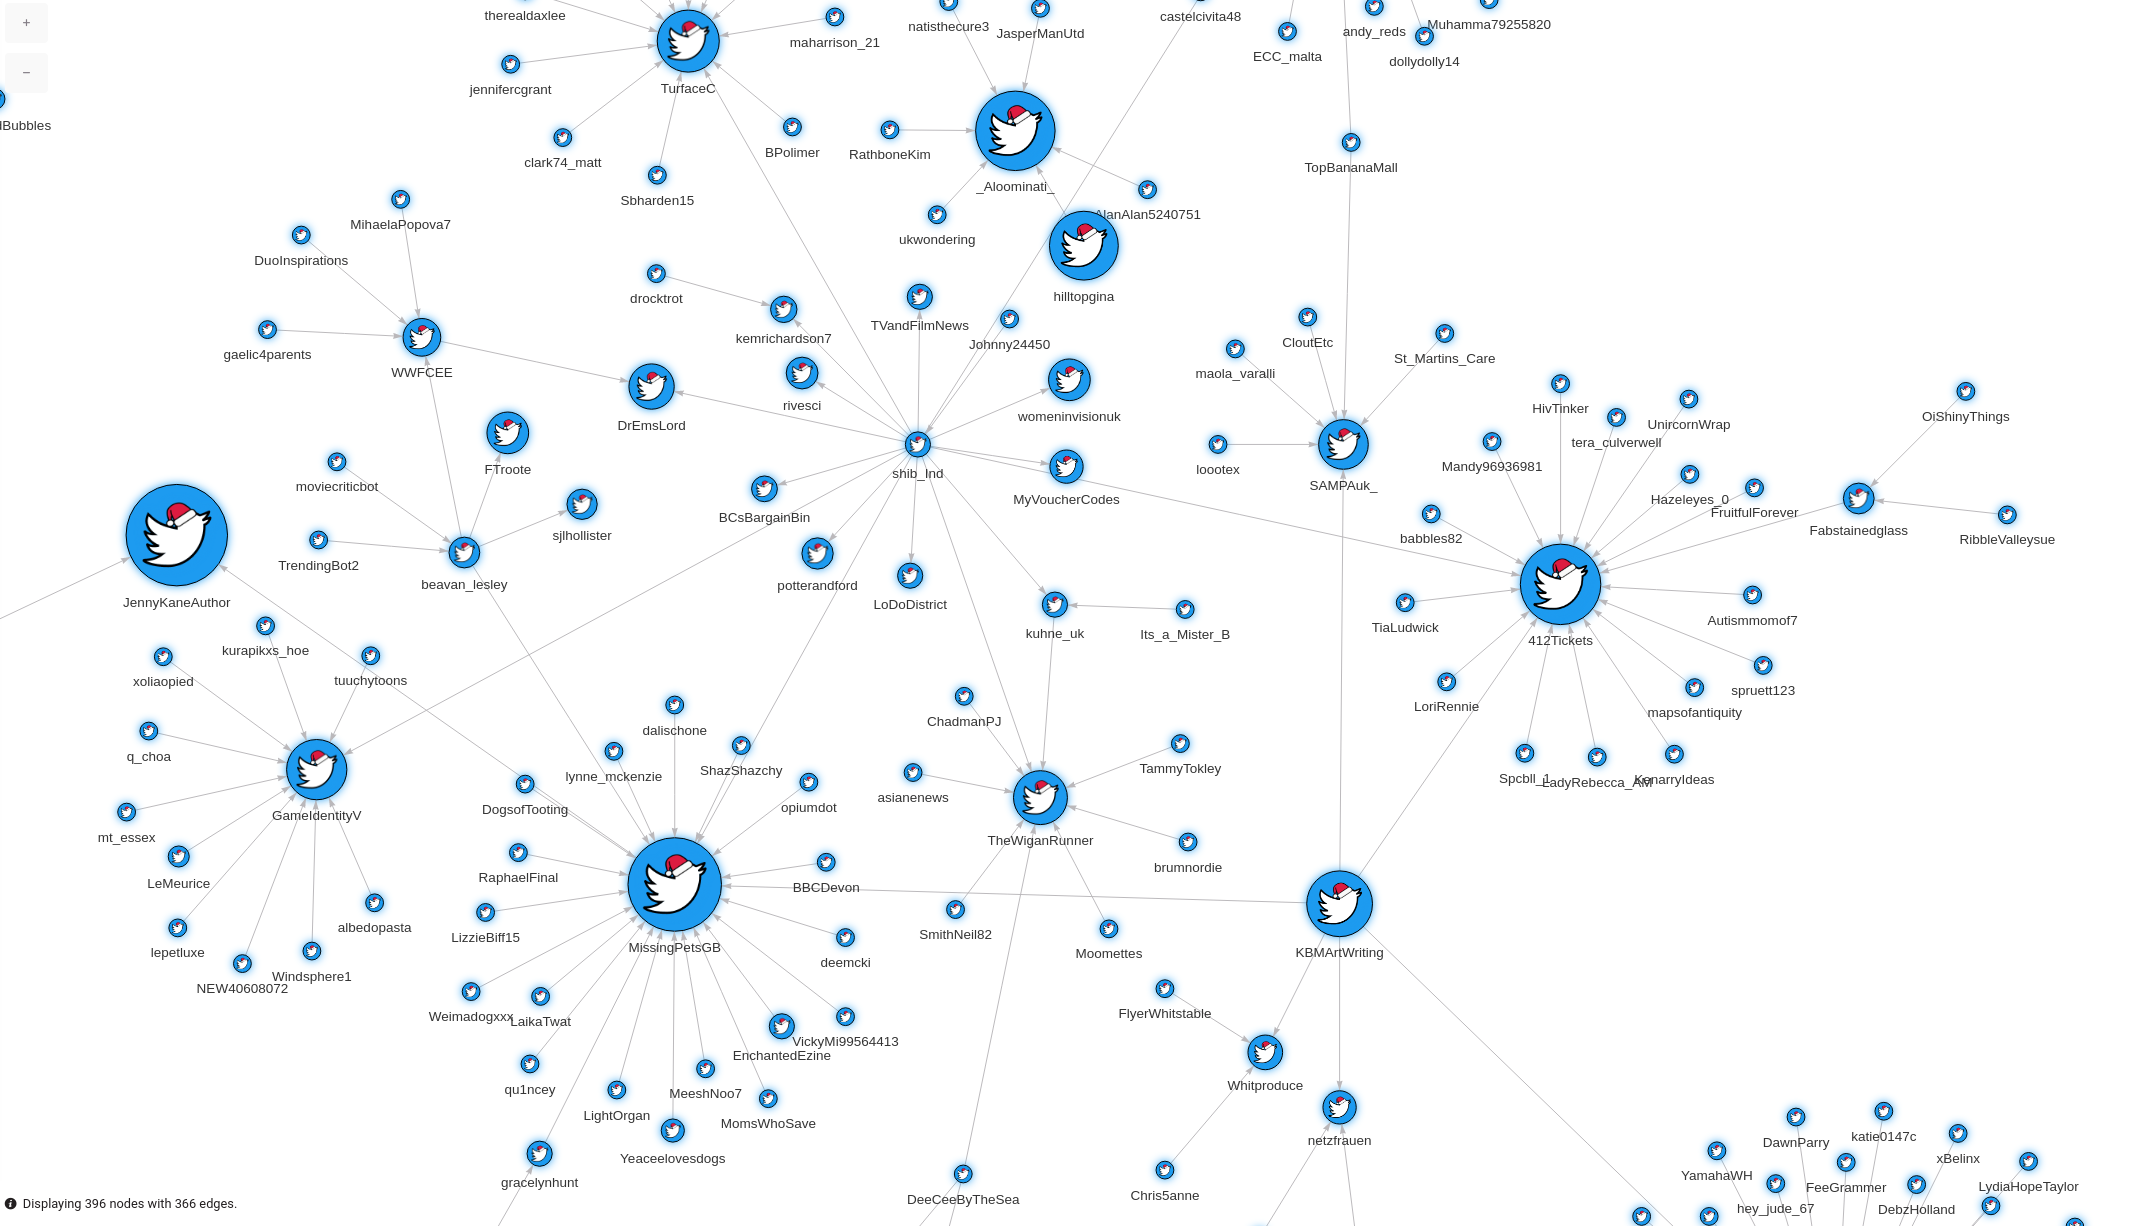 memgraph-tutorial-twitter-dynamic-pagerank-visualization